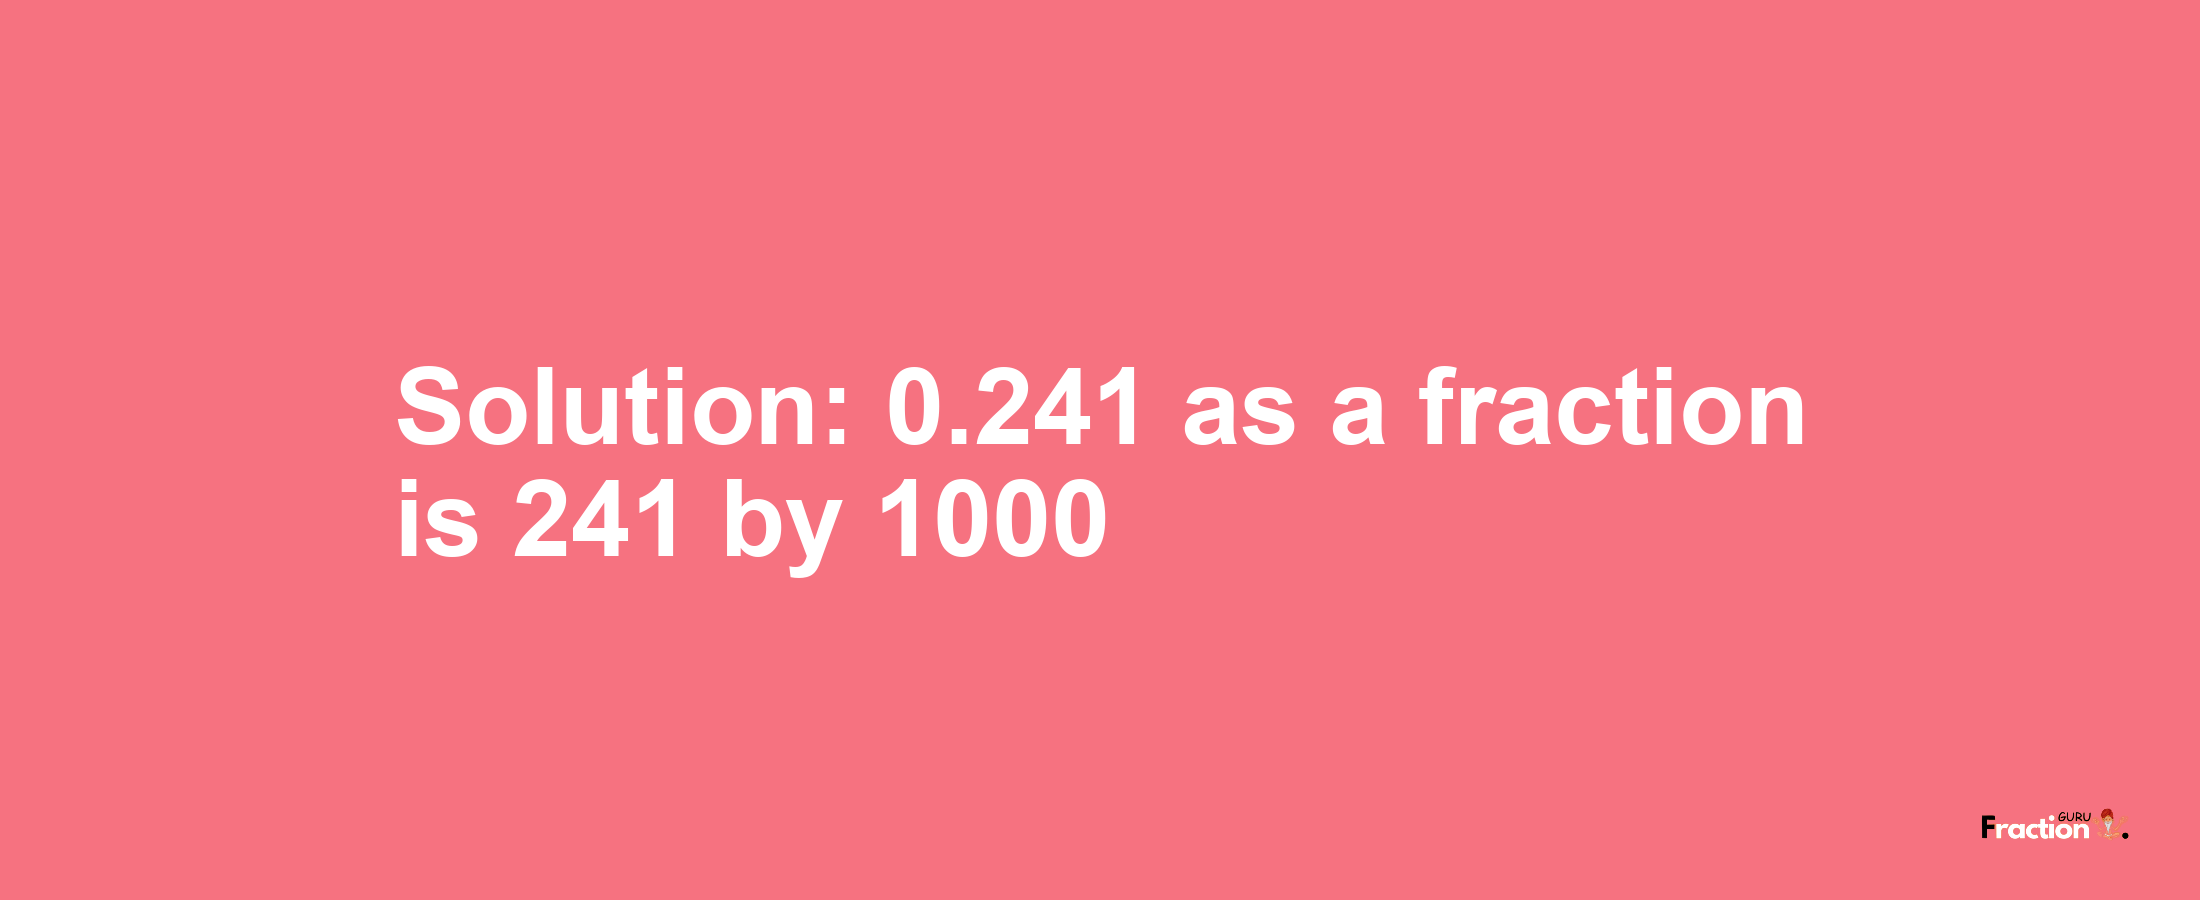 Solution:0.241 as a fraction is 241/1000